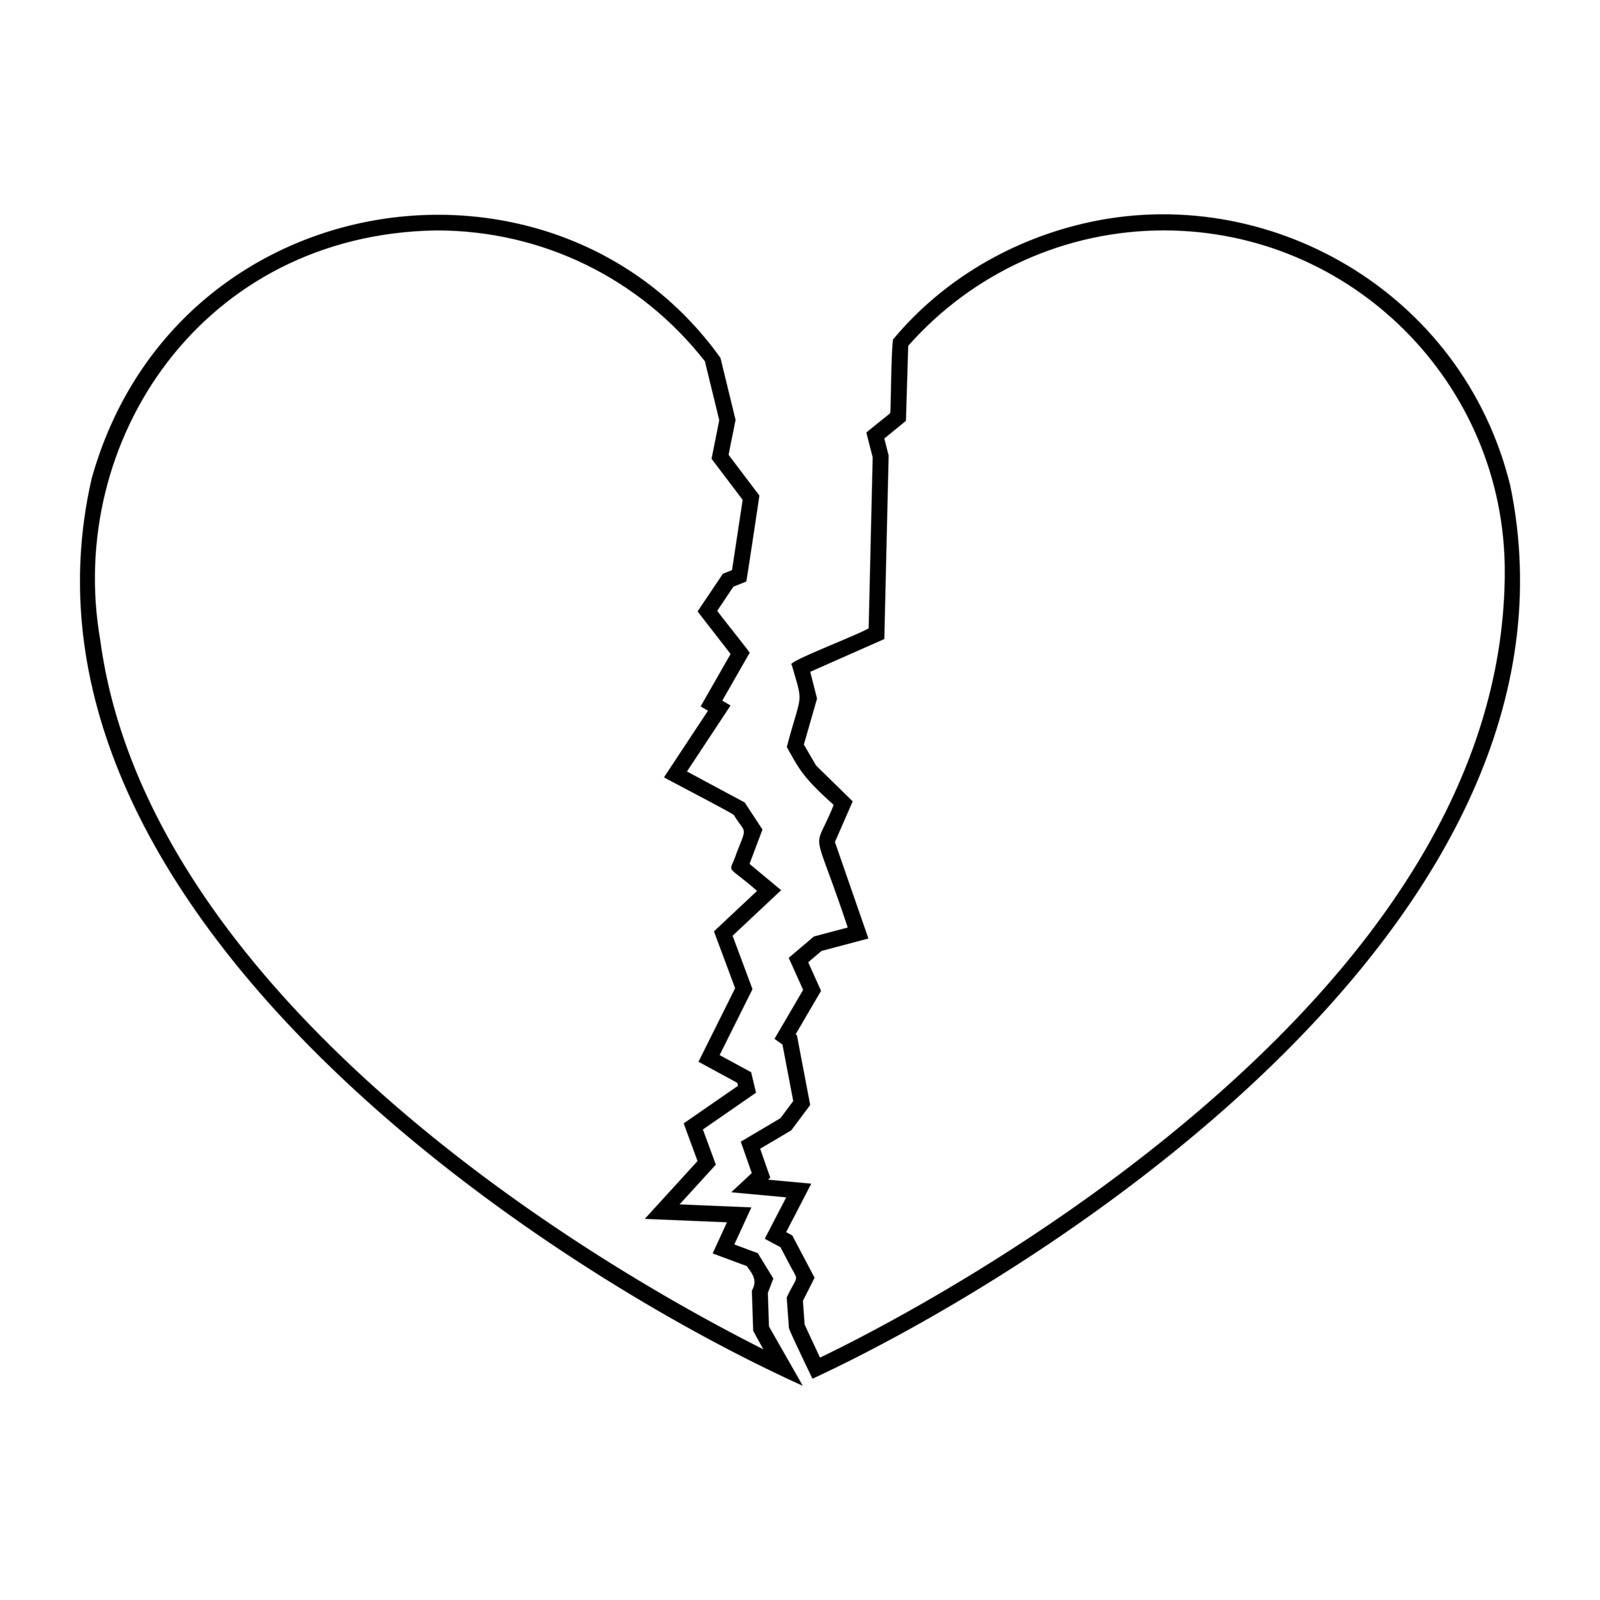 Broken heart icon outline black color vector illustration flat style image by serhii435